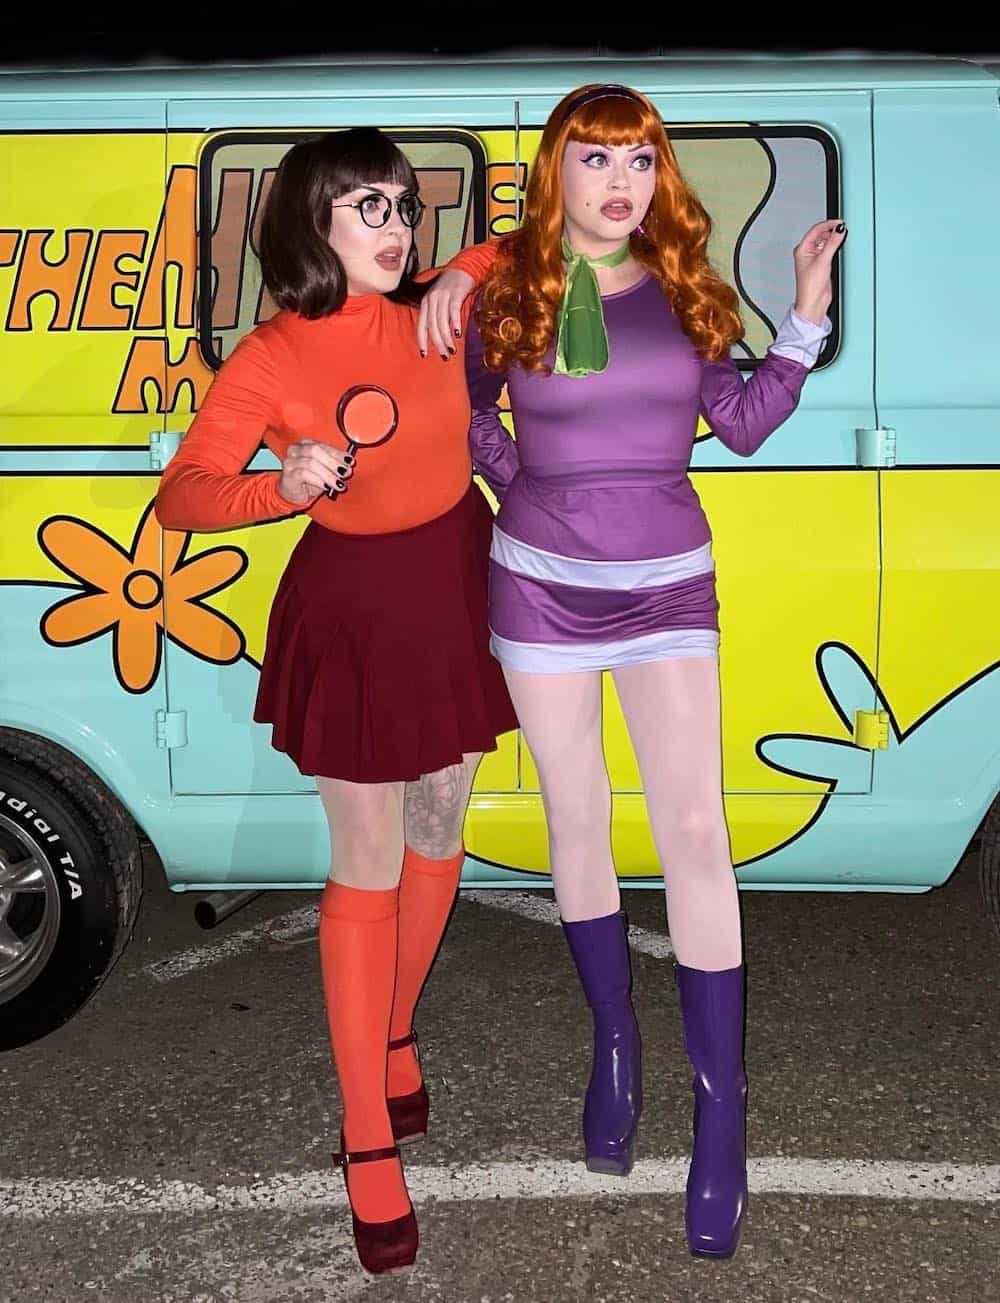 Two women dress up as Velma and Daphne from Scooby Doo on Halloween.